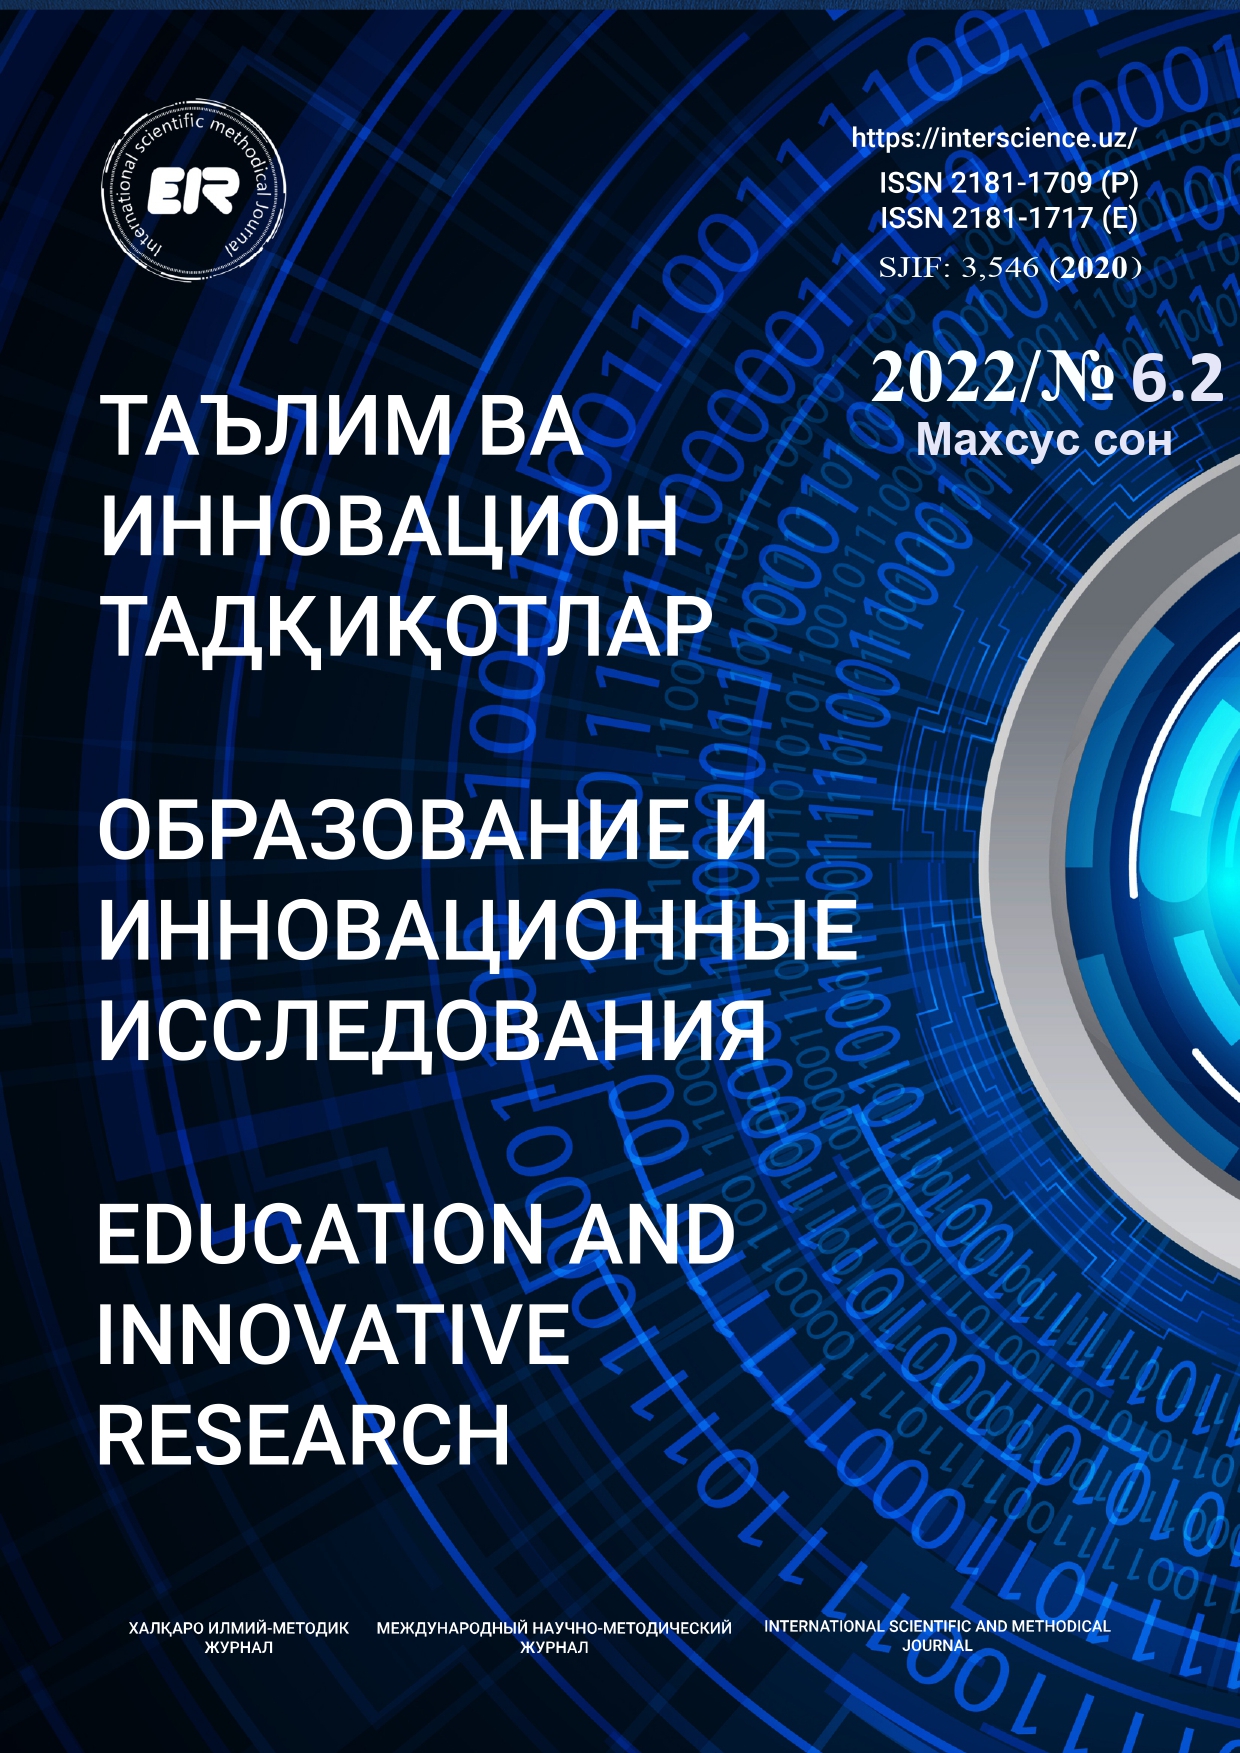 					View No. 6.2. Махсус сон (2022): Education and innovative research
				